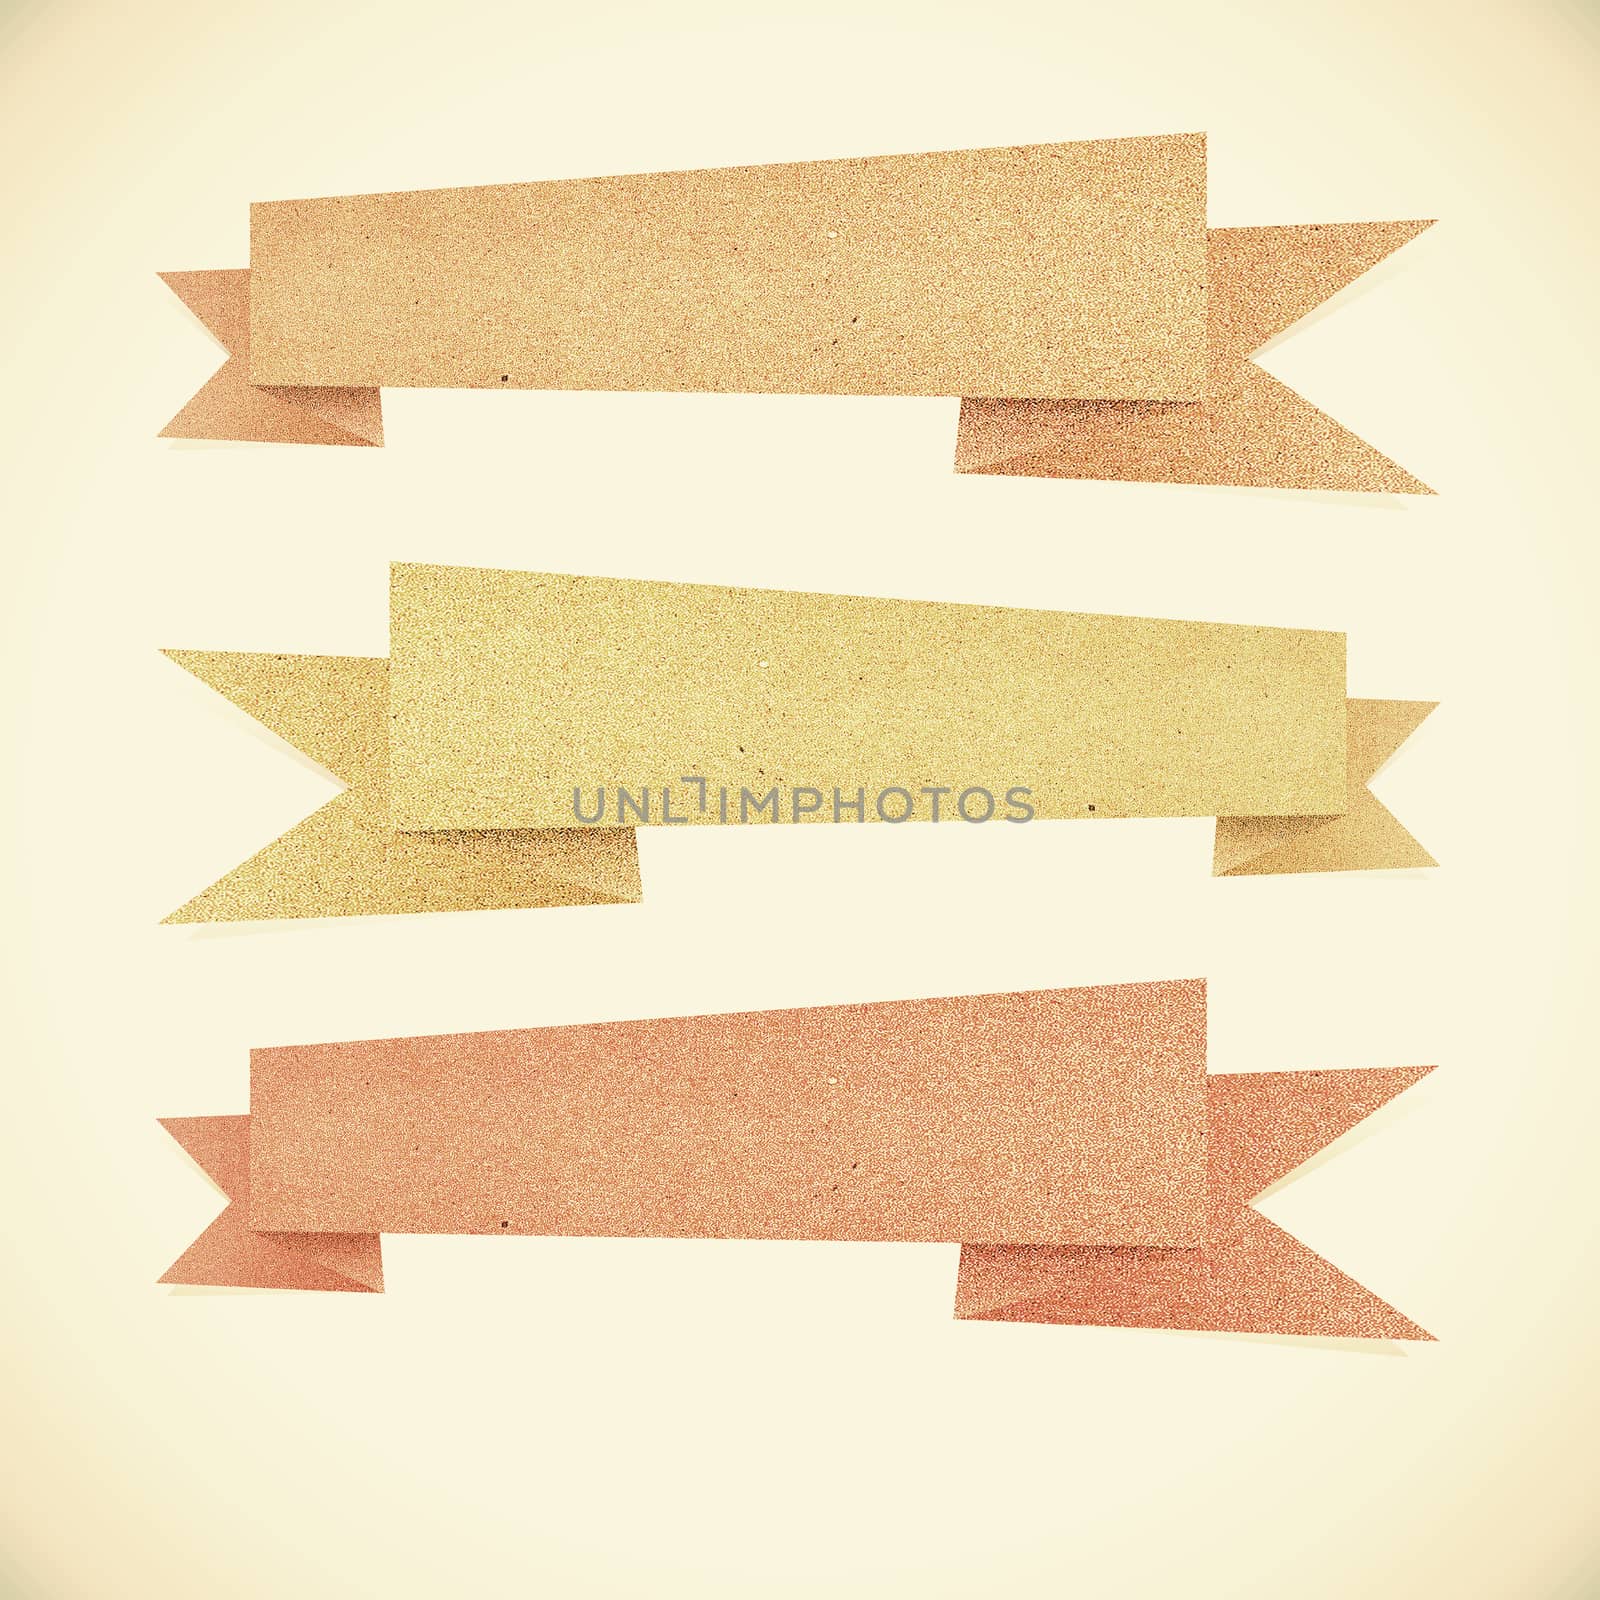 Paper texture ,Header tag recycled paper on vintage tone style by jakgree